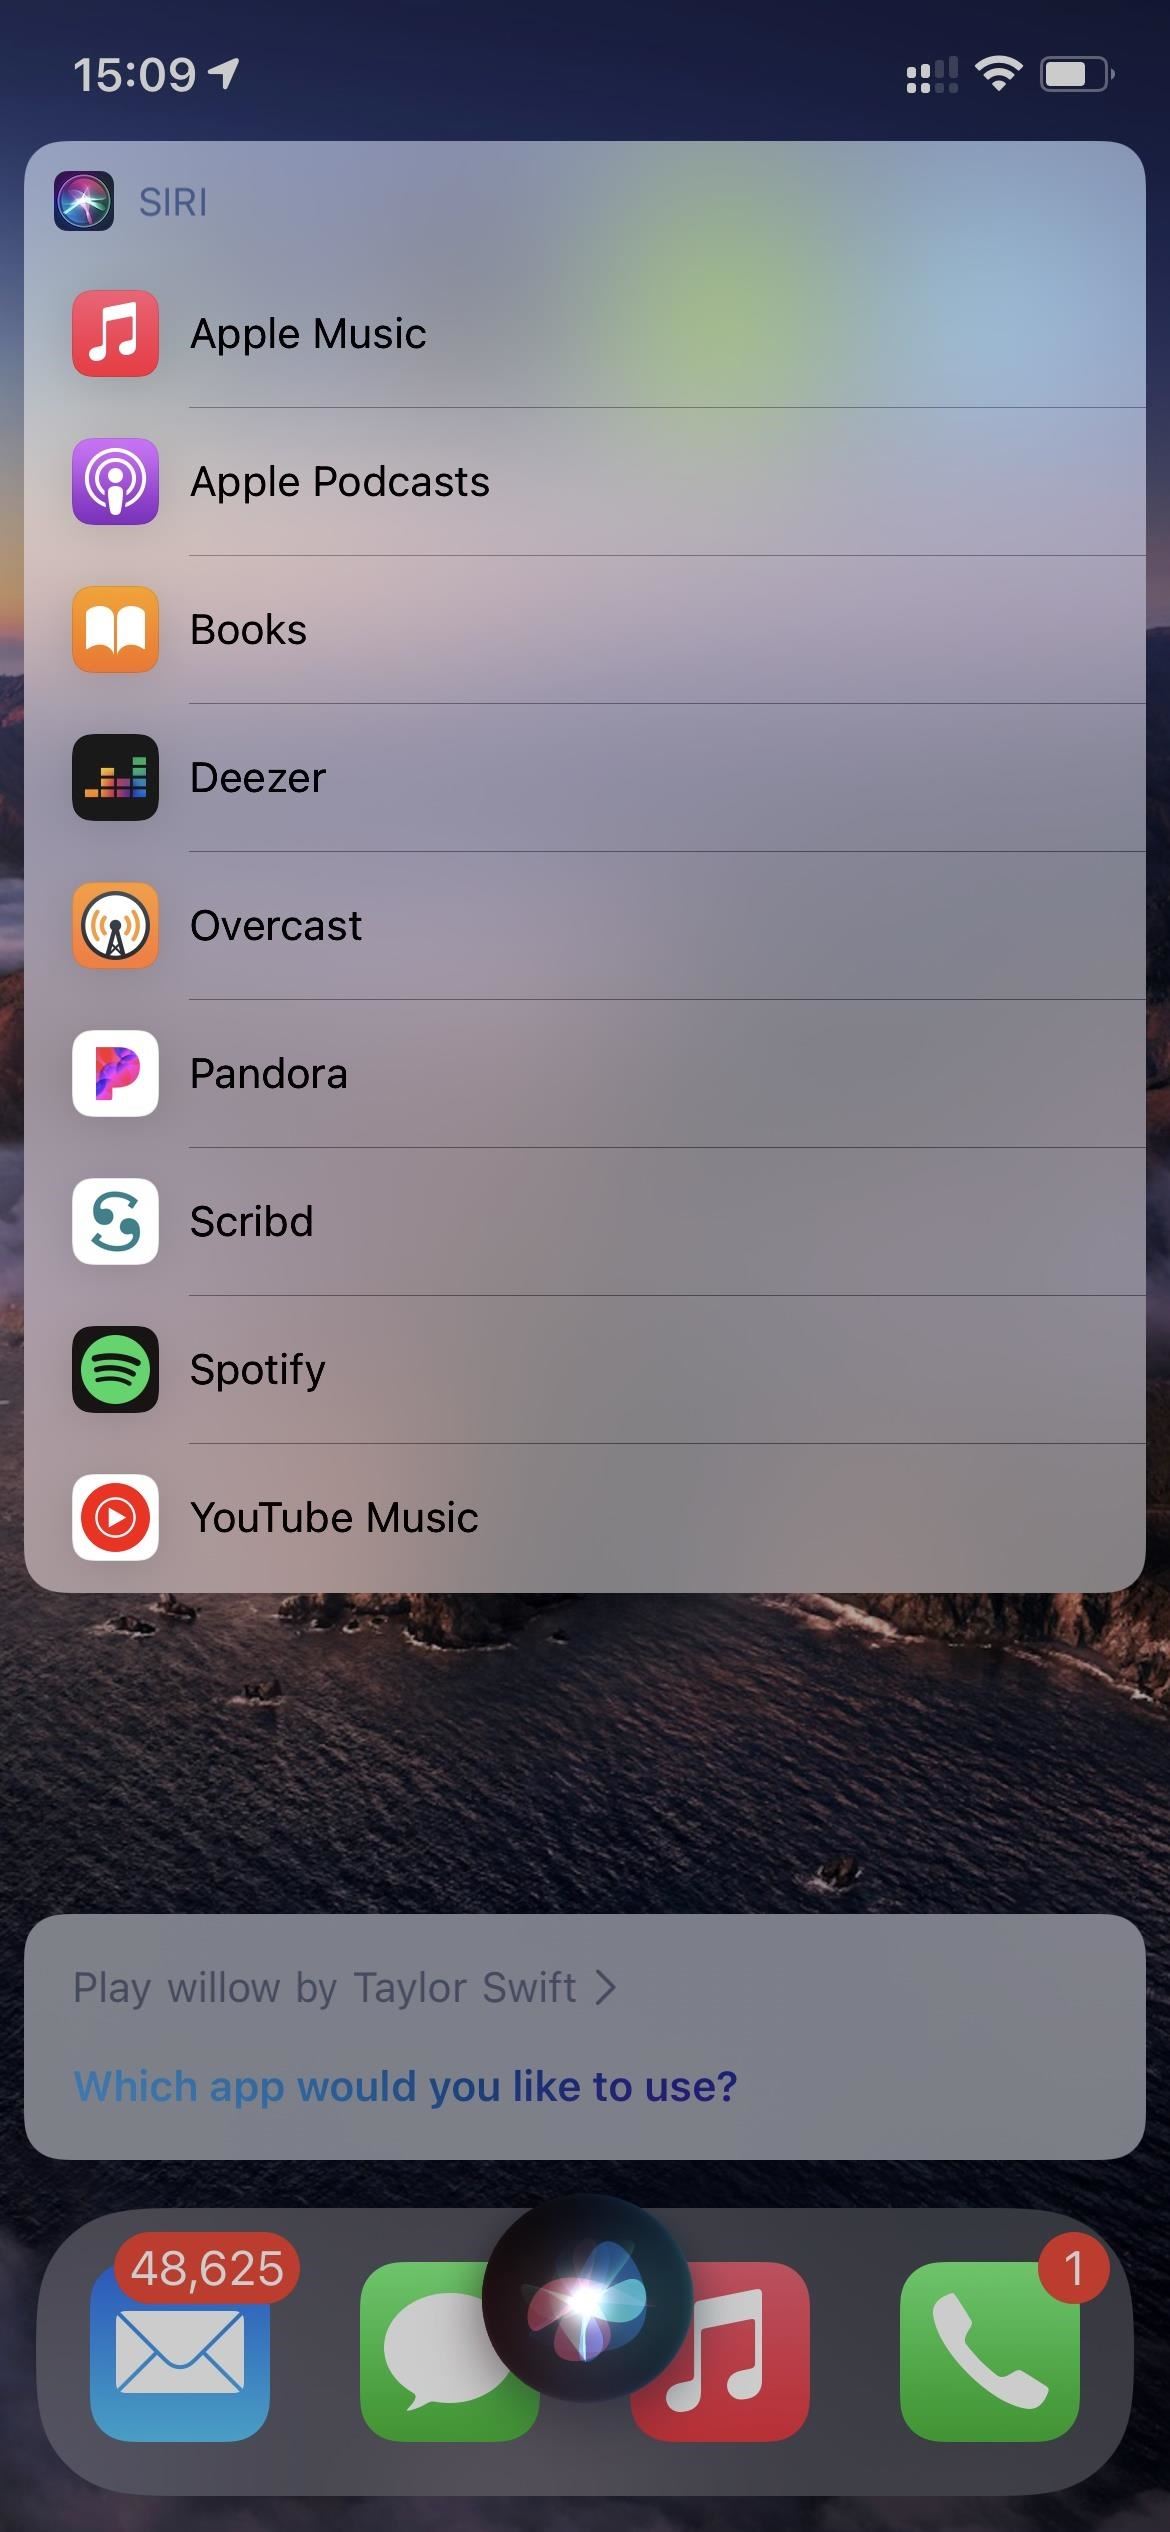 How to make Siri remember Pandora as your favorite music player in iOS 14.5